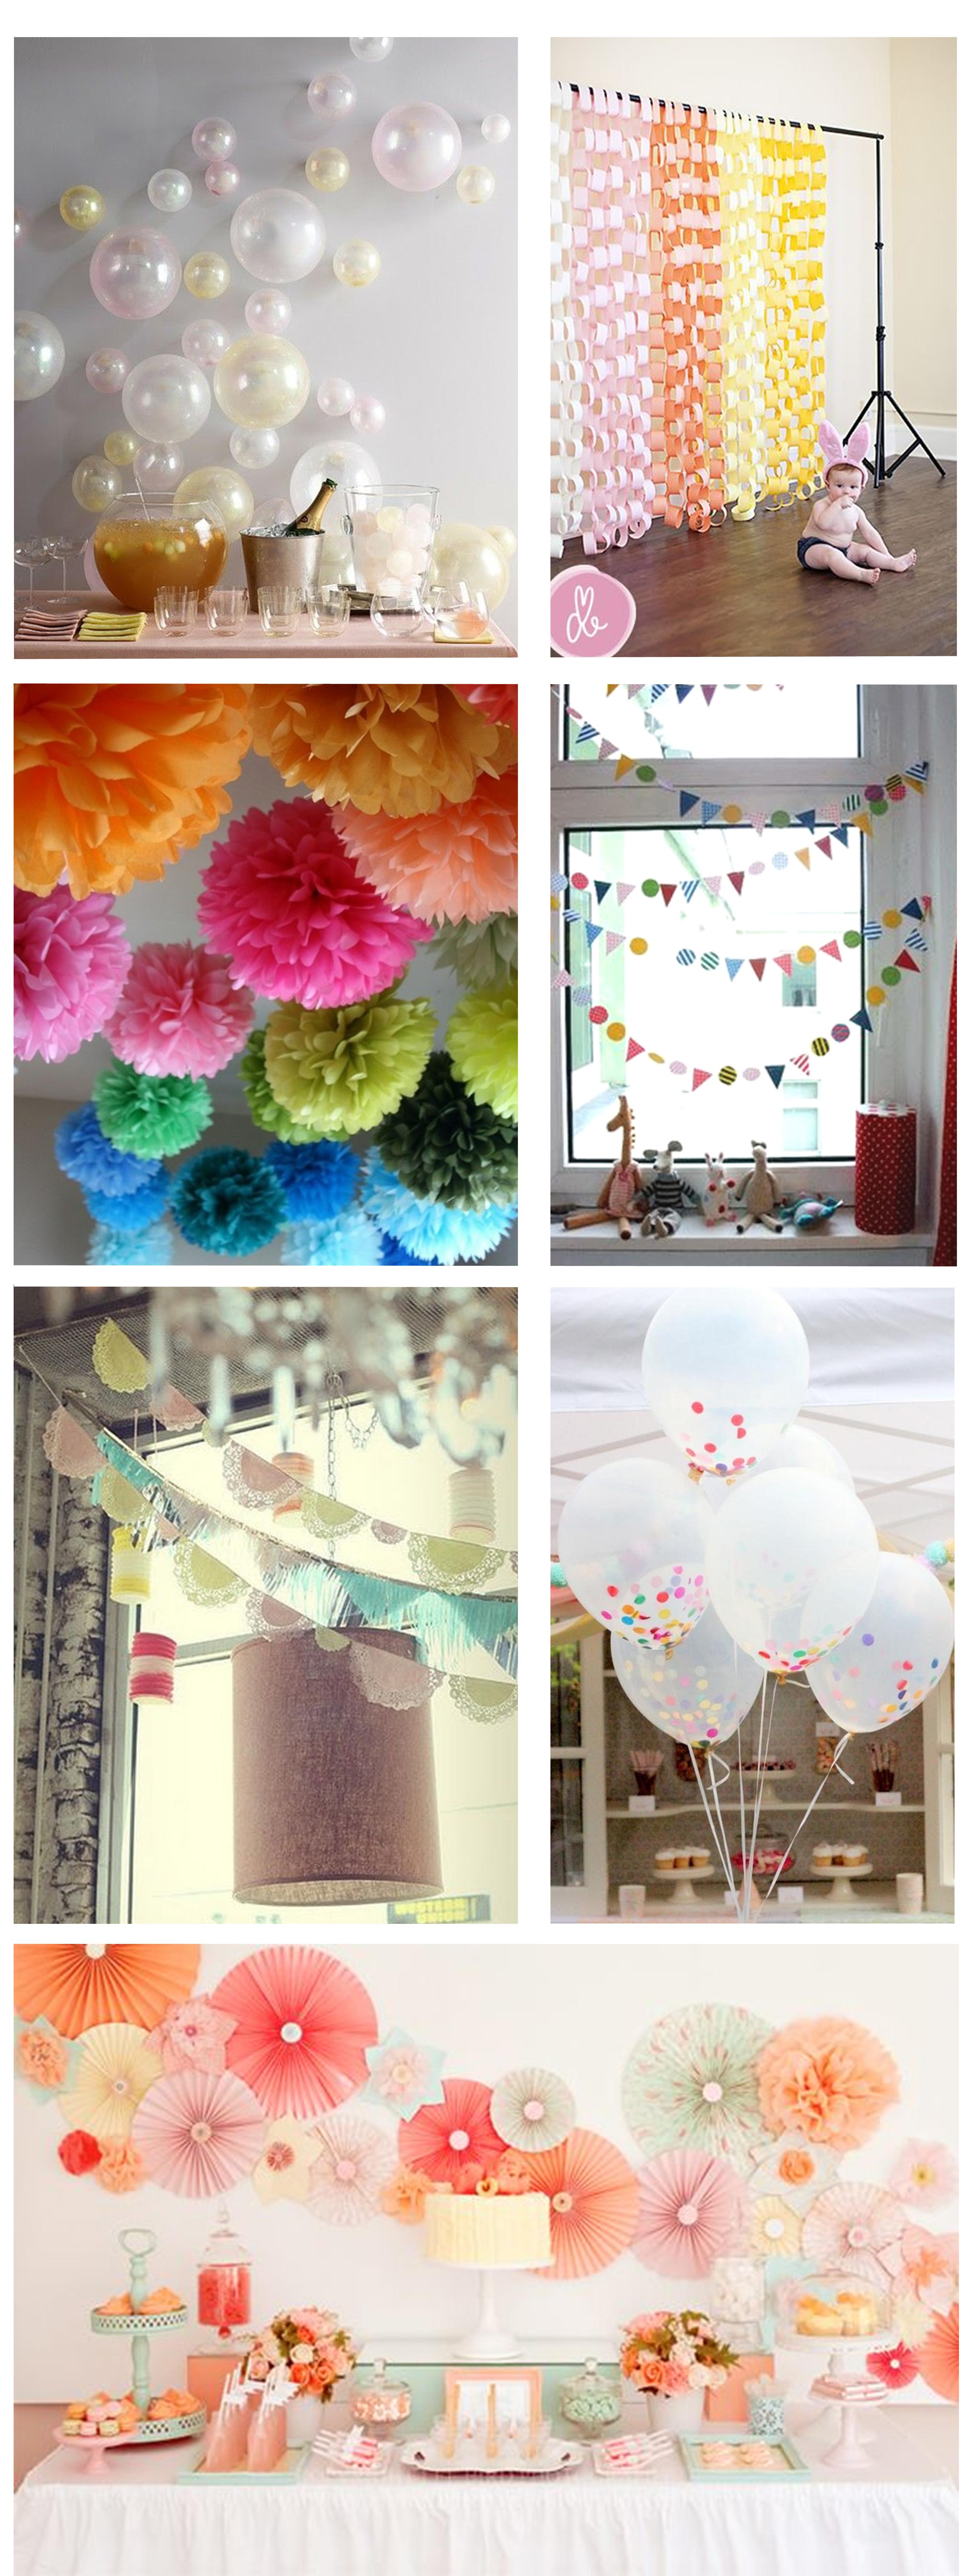 Ideas for home-made party decorations | My Thrifty Life by Cassie Fairy